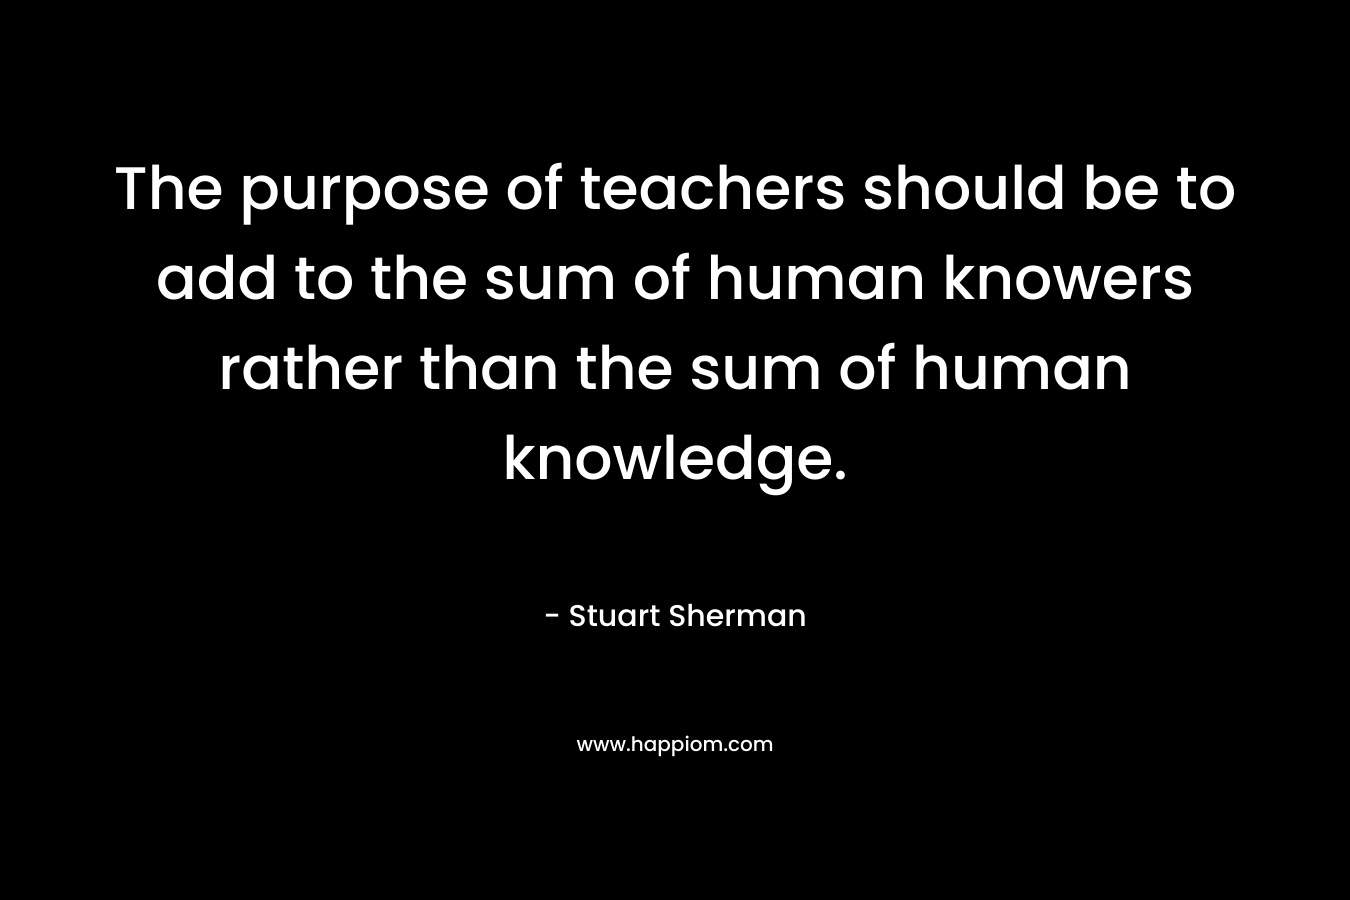 The purpose of teachers should be to add to the sum of human knowers rather than the sum of human knowledge. – Stuart Sherman